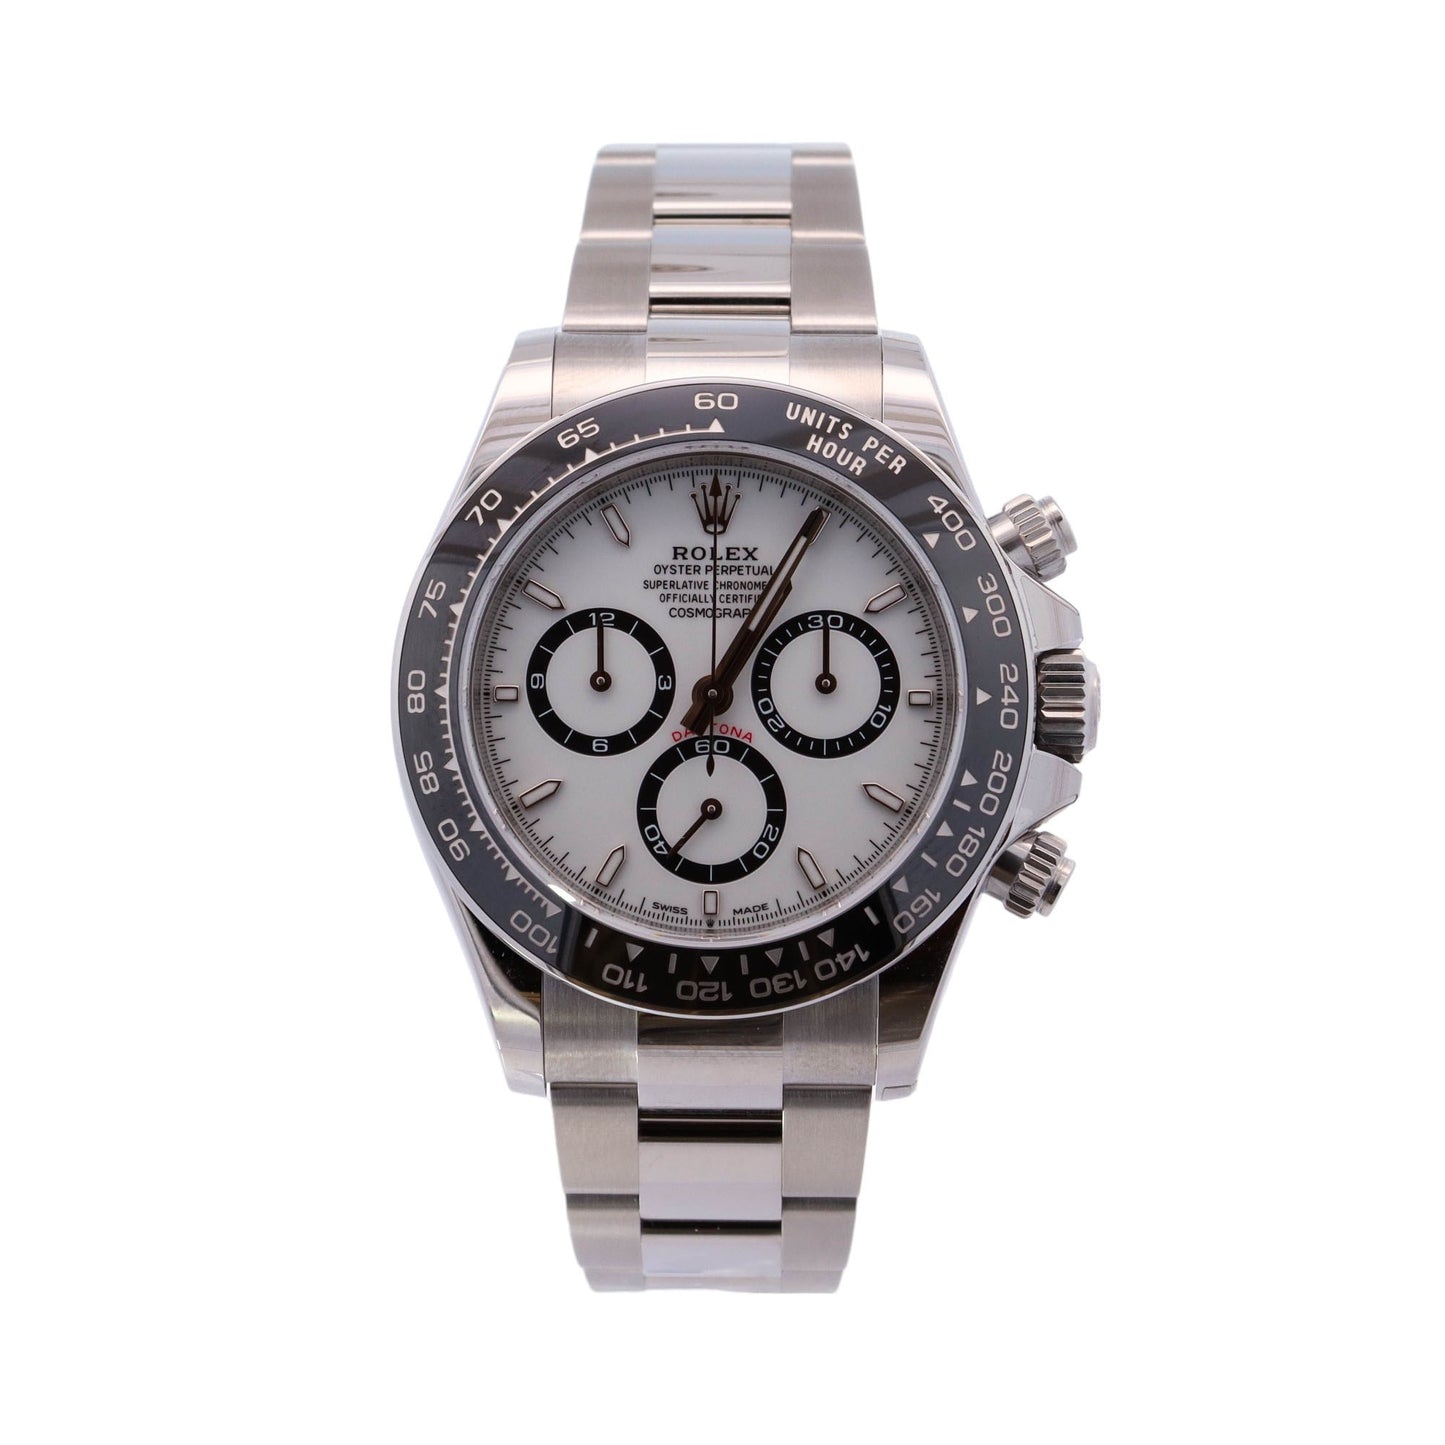 Rolex Daytona “Panda” Stainless Steel 40mm White Chronograph Dial Watch Reference# 126500LN